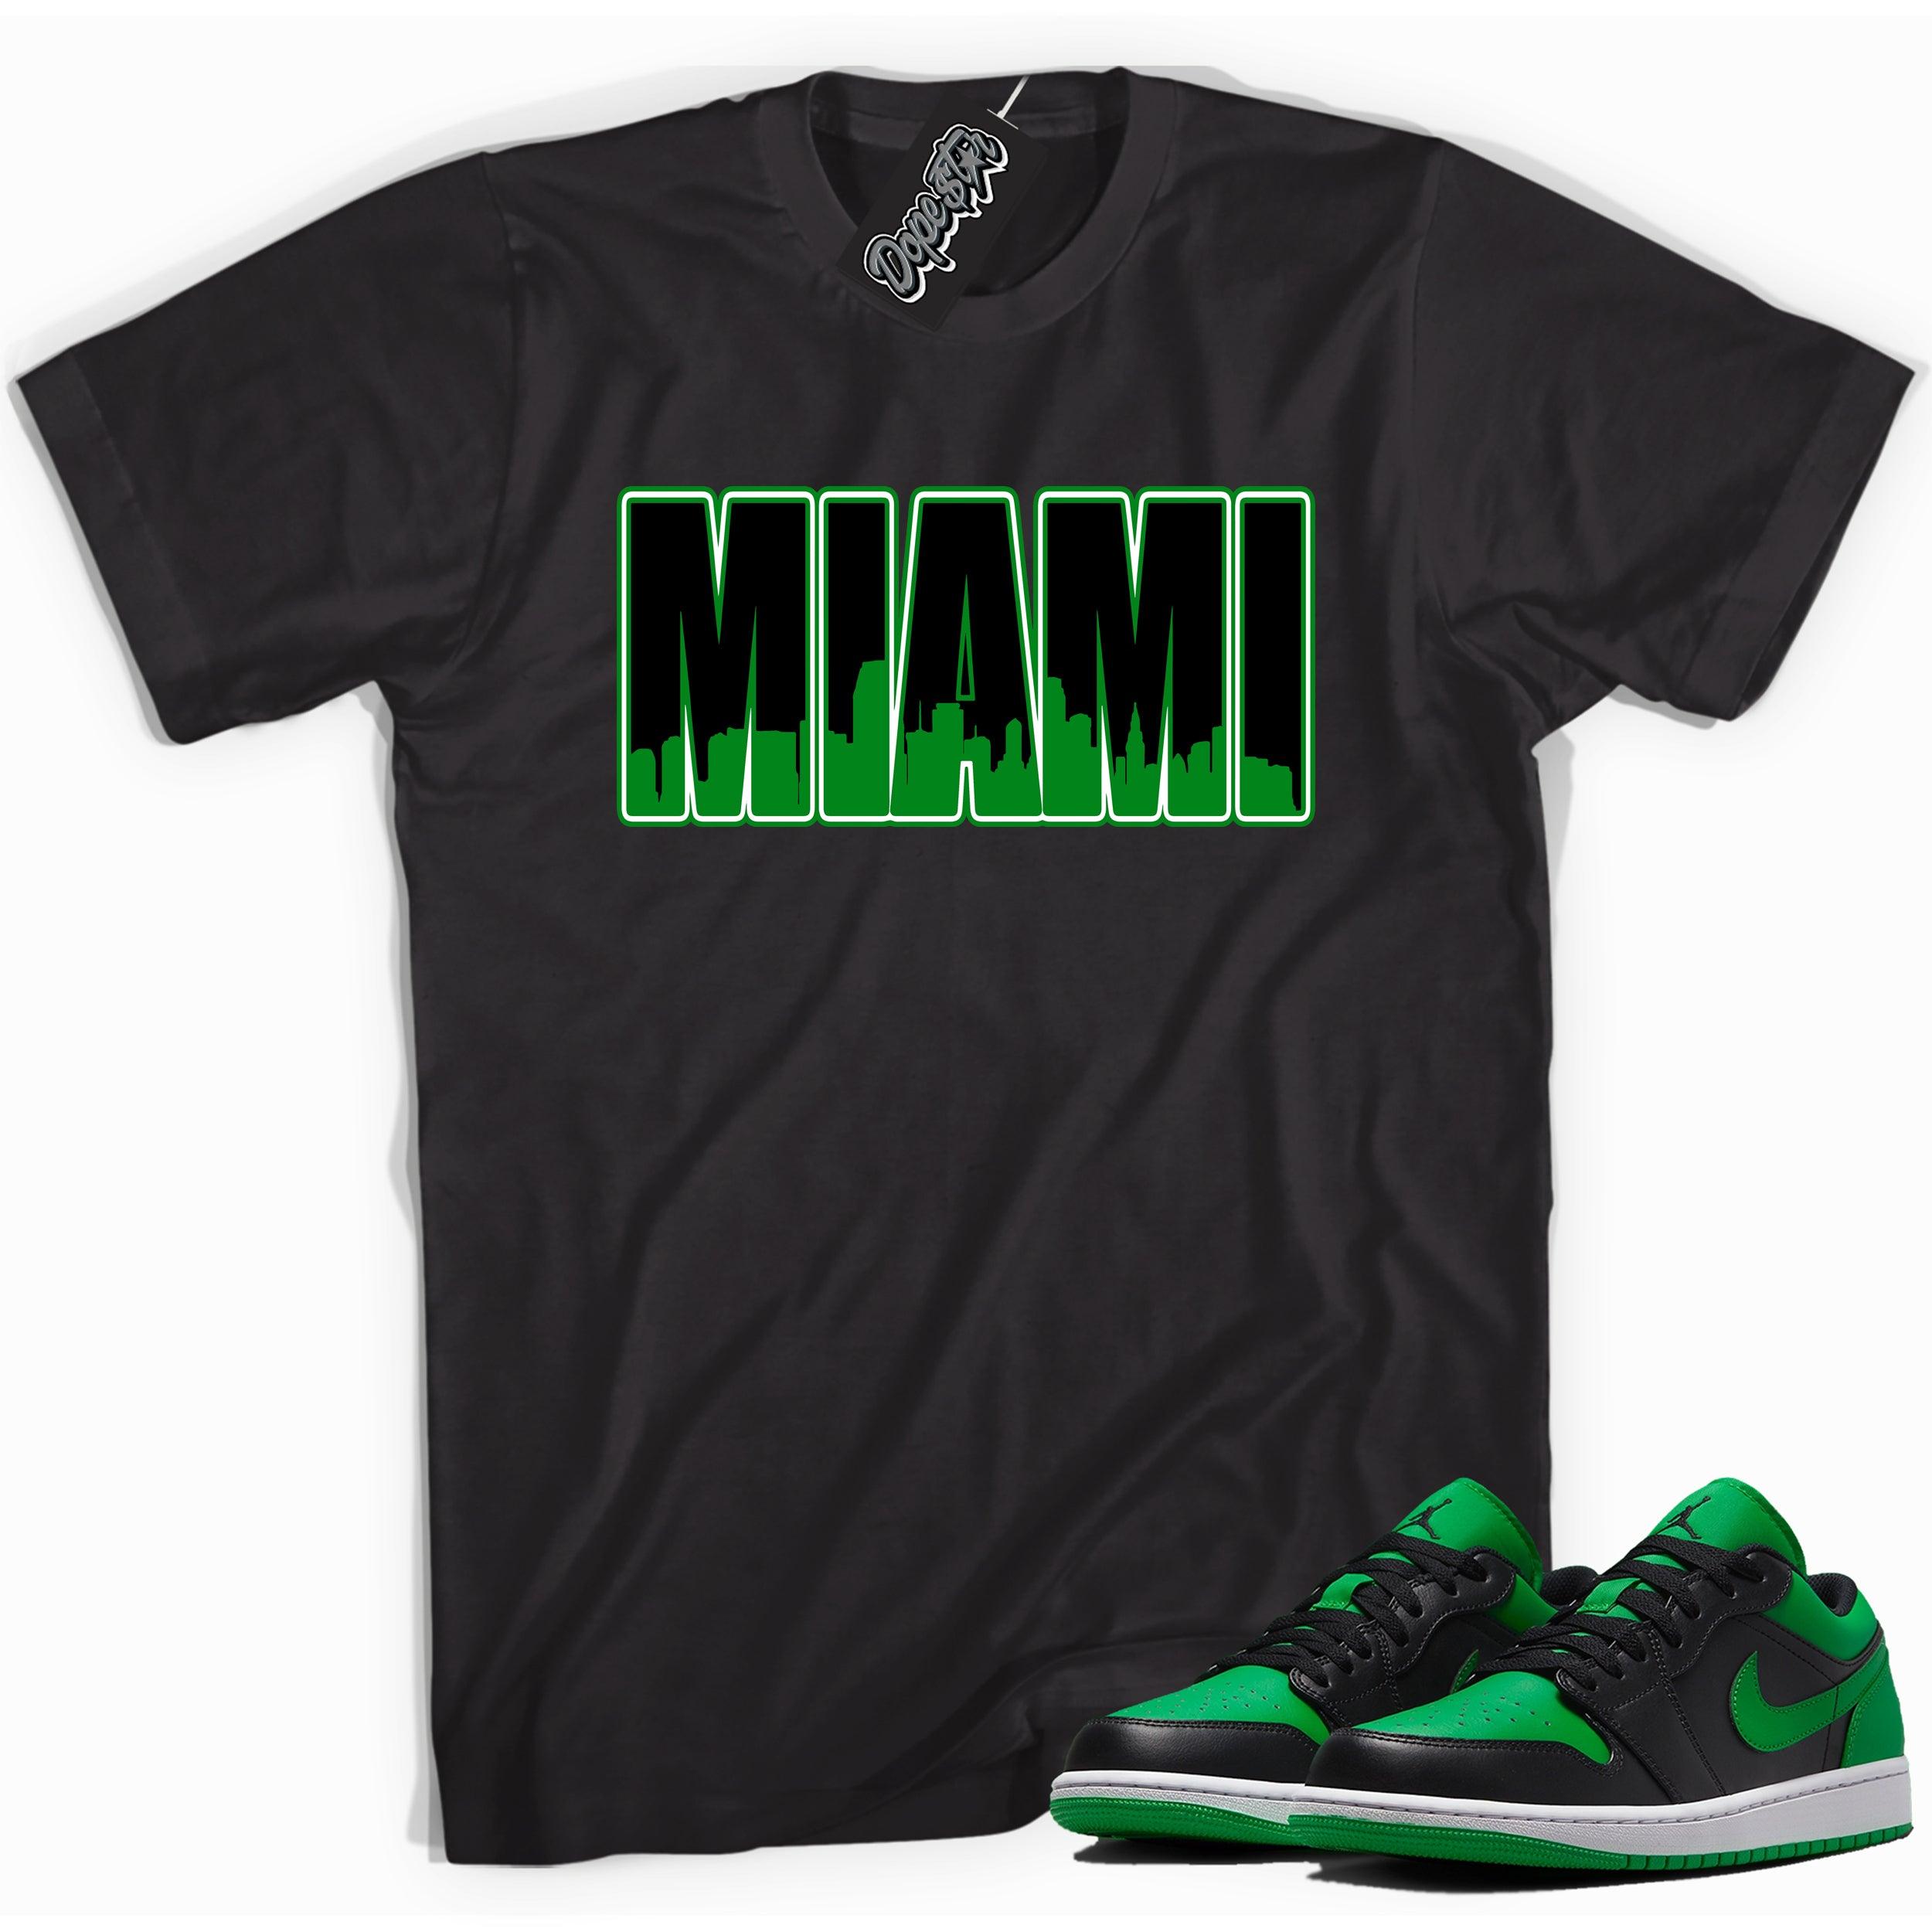 Cool black graphic tee with 'miami' print, that perfectly matches Air Jordan 1 Low Lucky Green sneakers